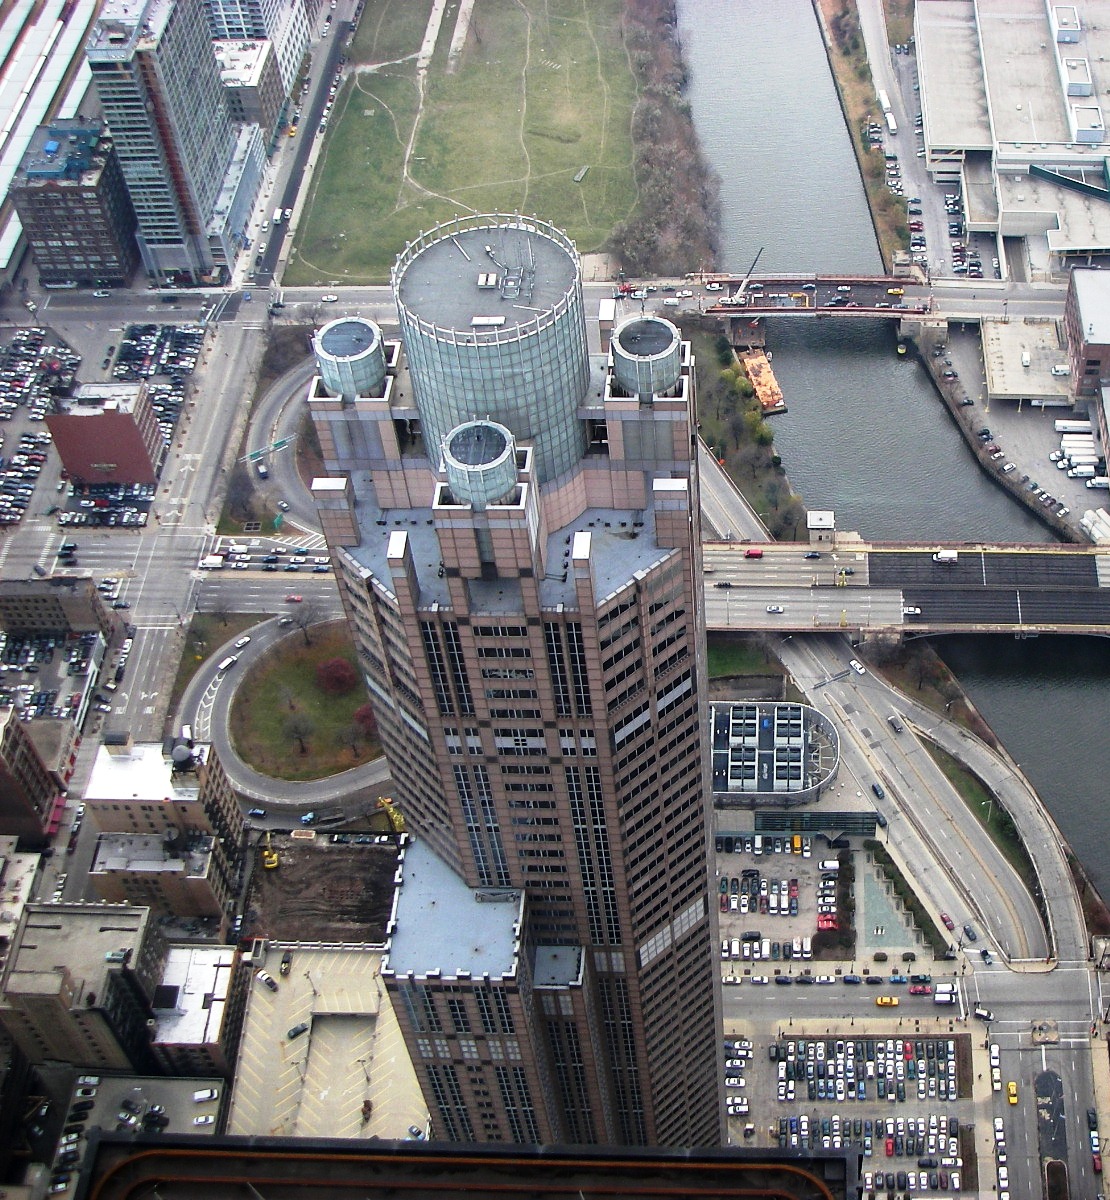 311_South_Wacker_Drive_(Chicago,_IL)_from_the_top_of_the_Willis_Tower_29Nov2007.JPG